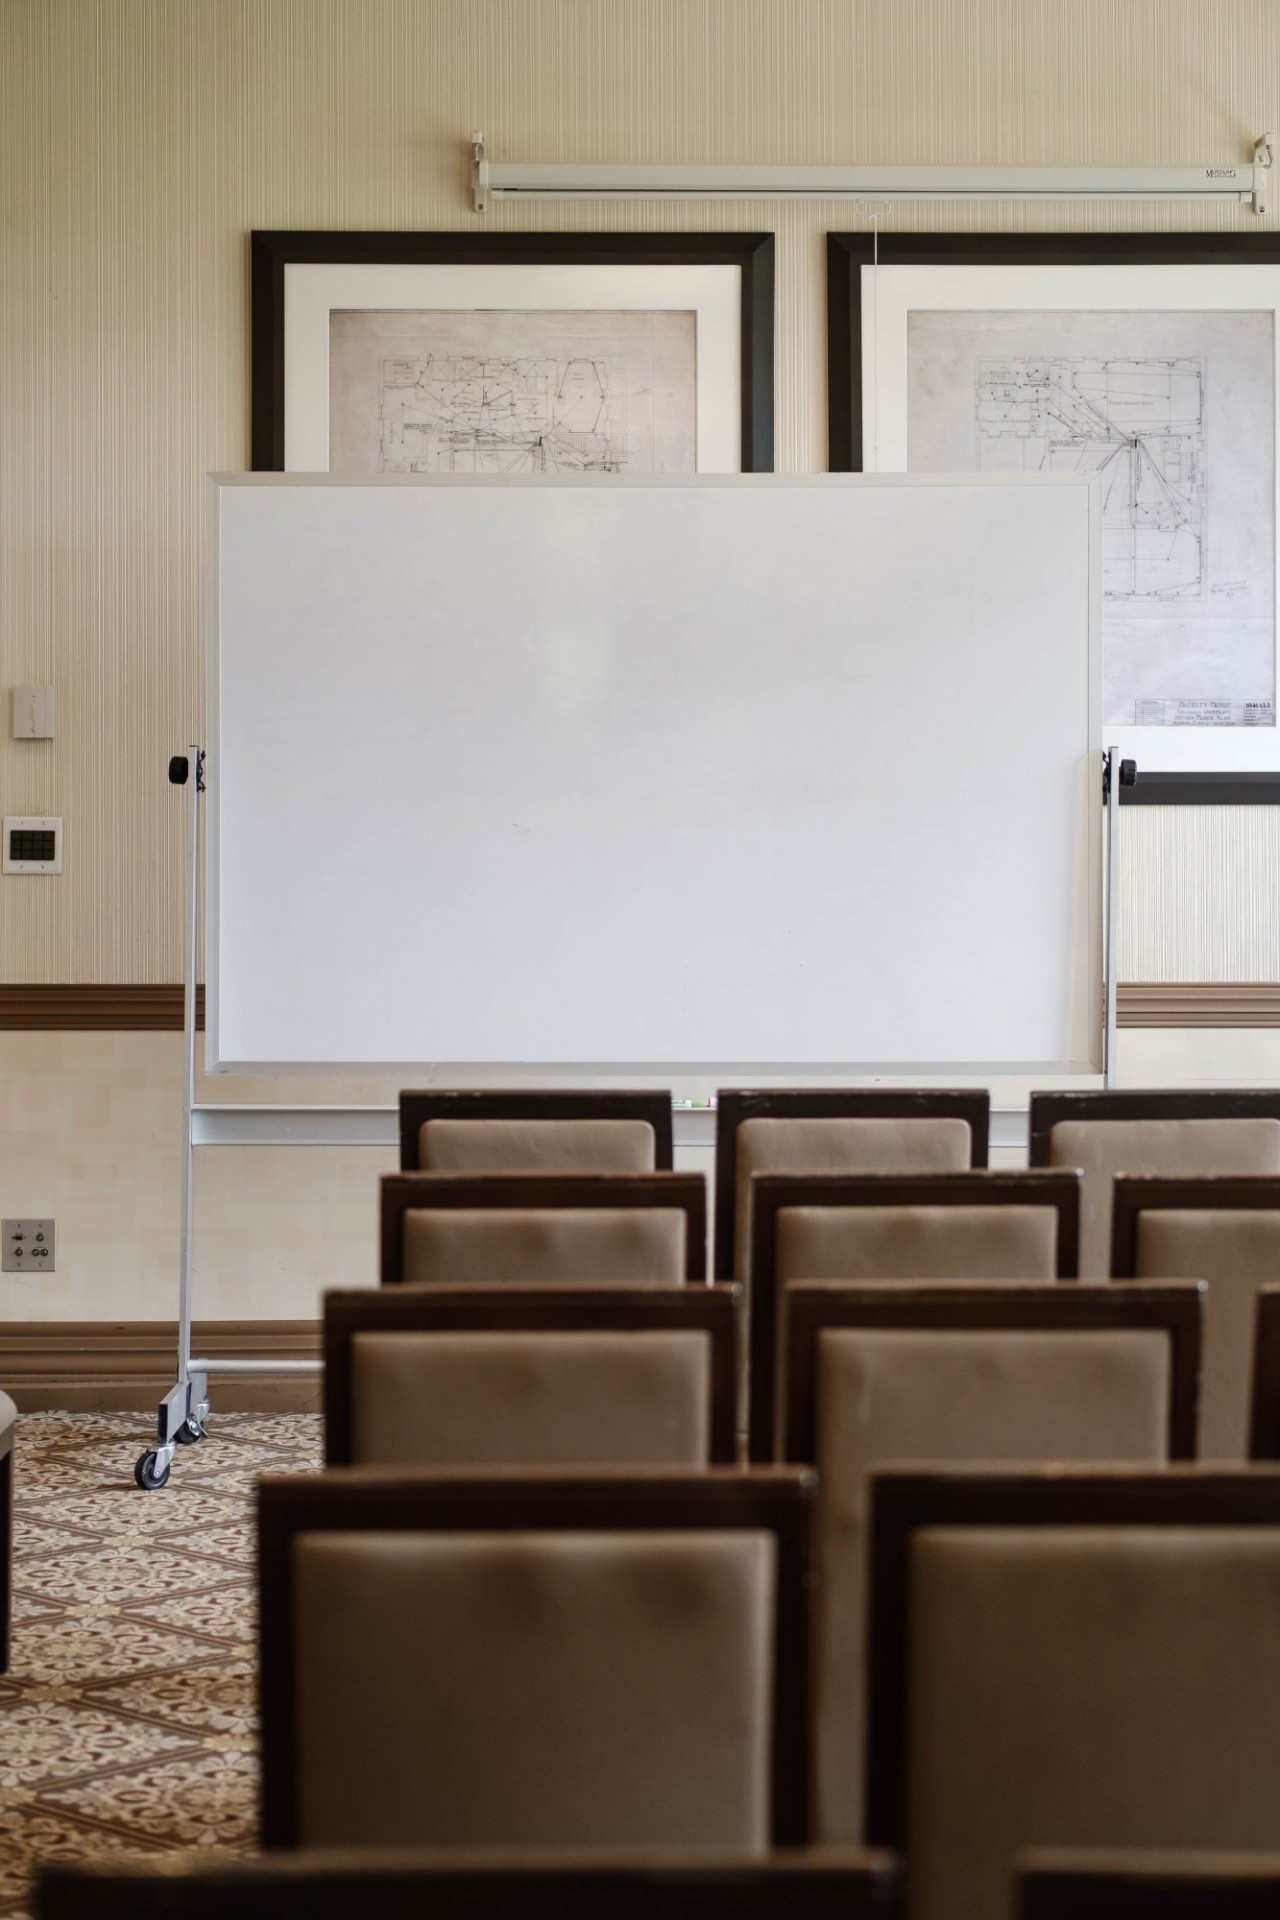 A whiteboard is set in Seminar Room 4